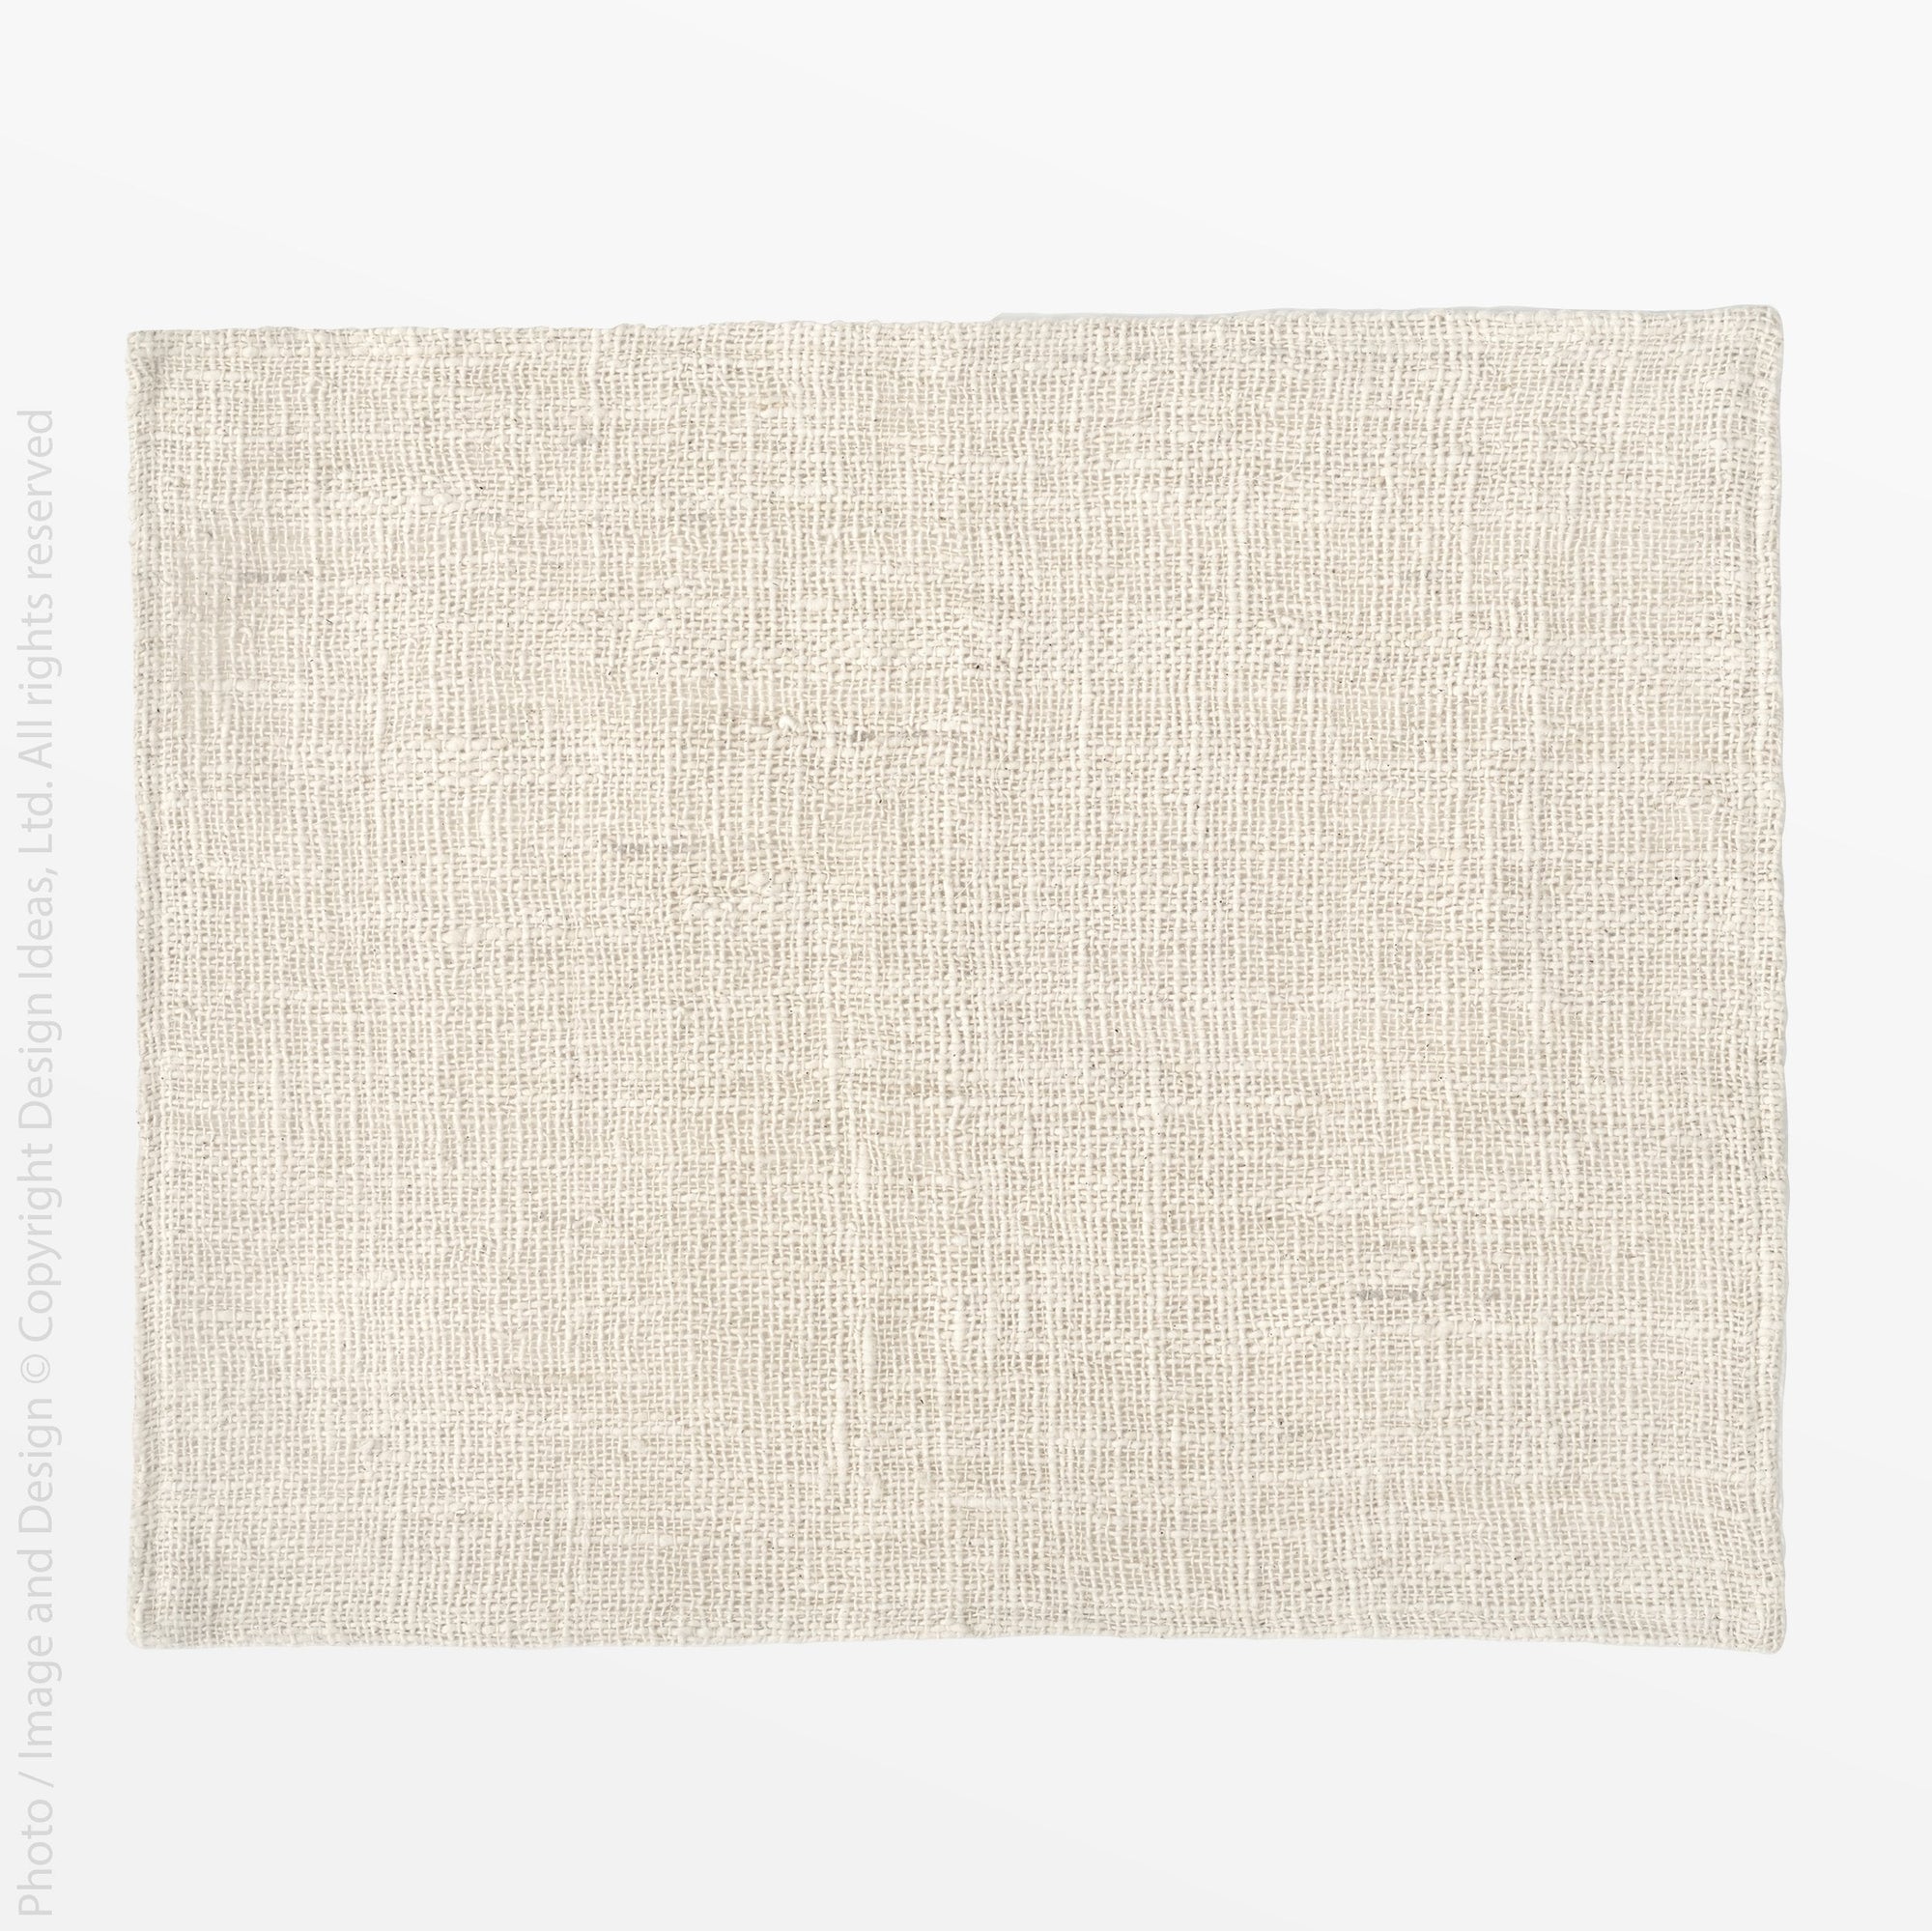 Capri Loosely Woven Cotton Placemat - natural Color | Image 1 | From the Capri Collection | Masterfully Loosely Woven with natural cotton for long lasting use | Available in natural color | texxture home